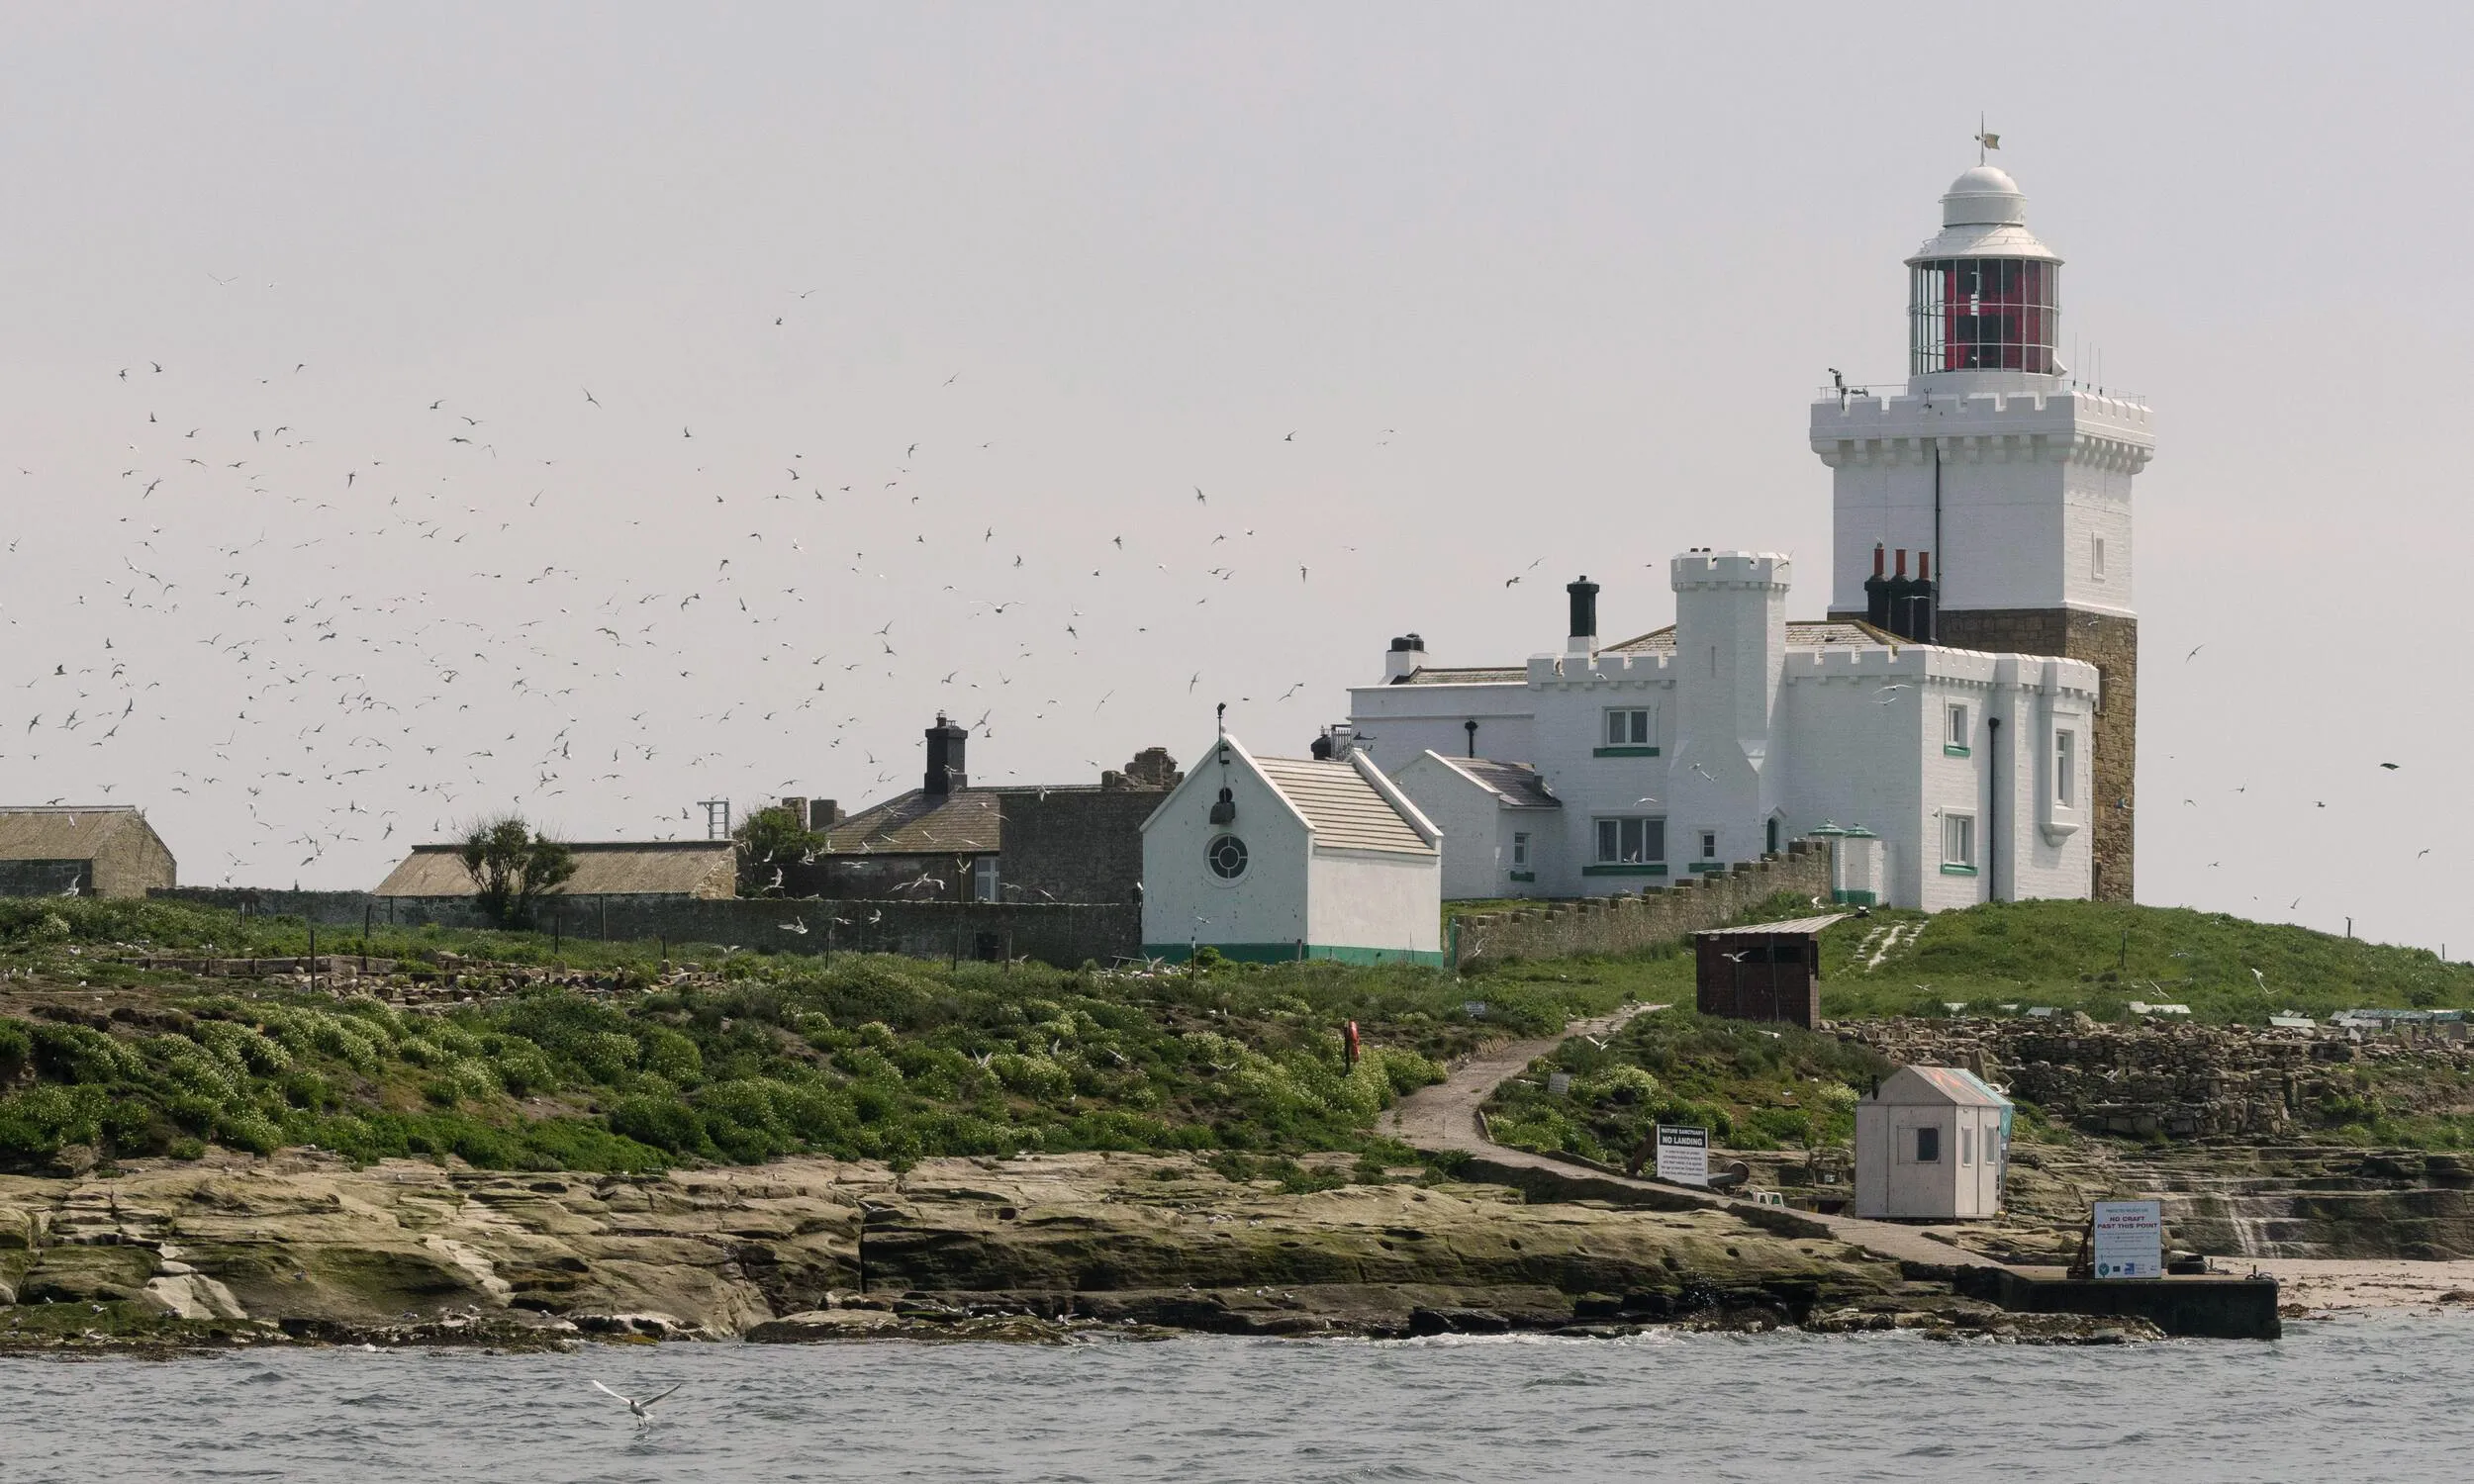 A view of Coquet Island lighthouse, taken from the water